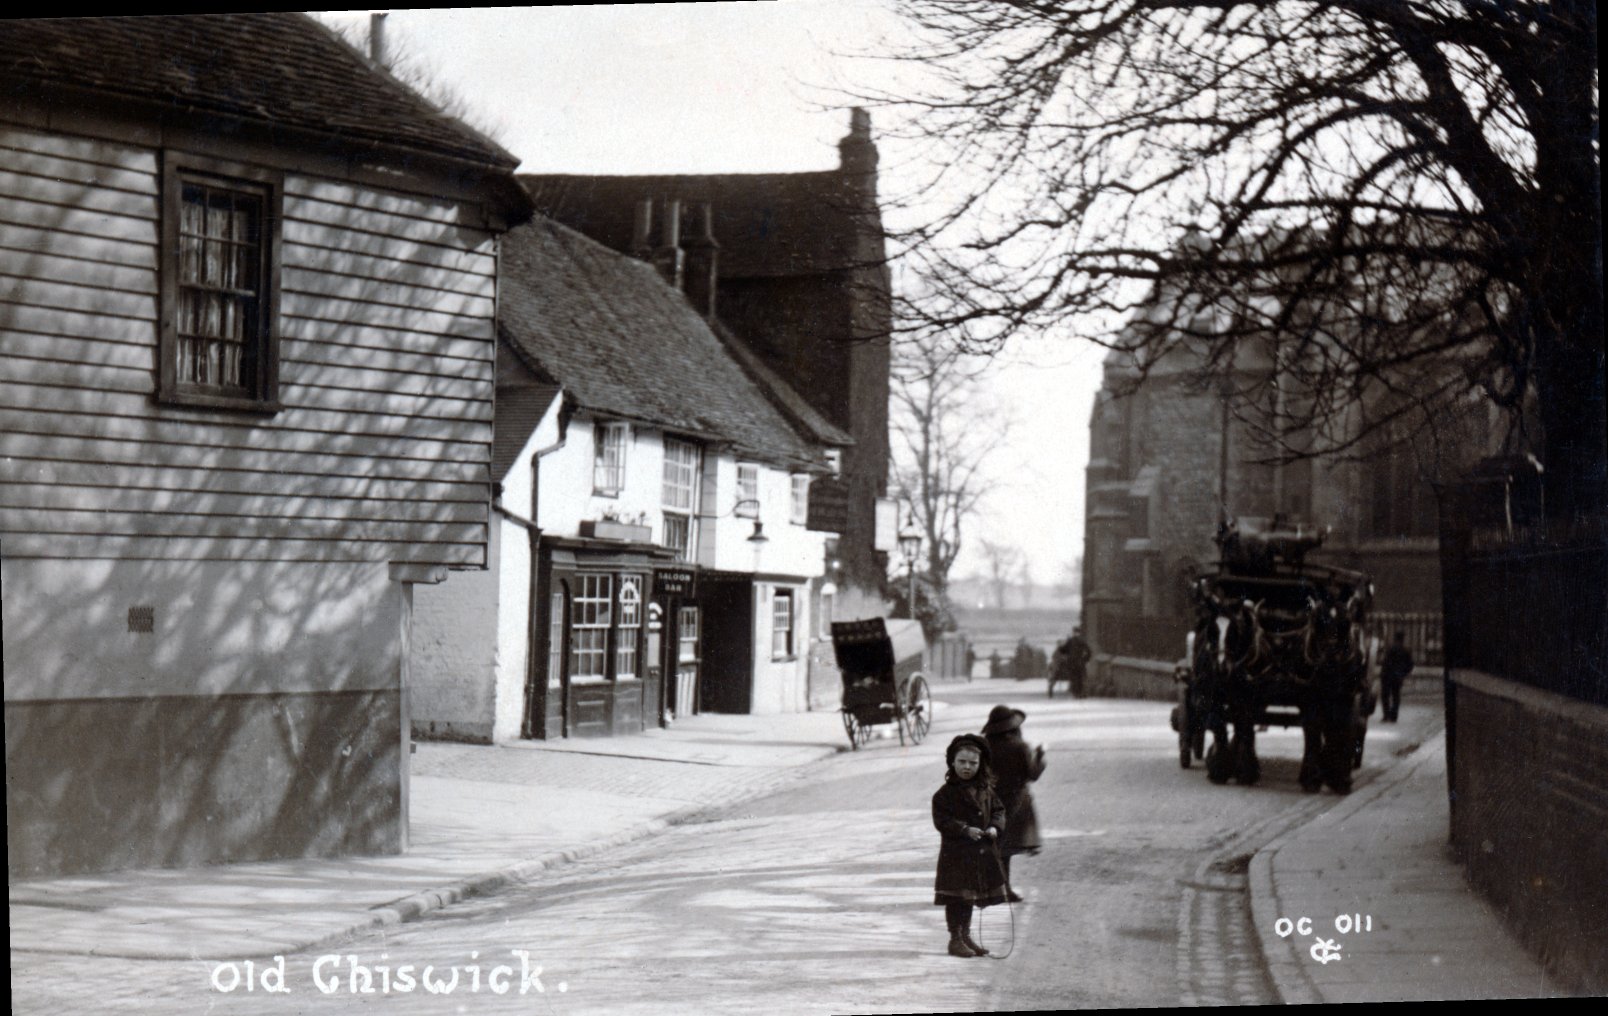 Chiswick,hotels and inns Burlington Arms,street-townscape